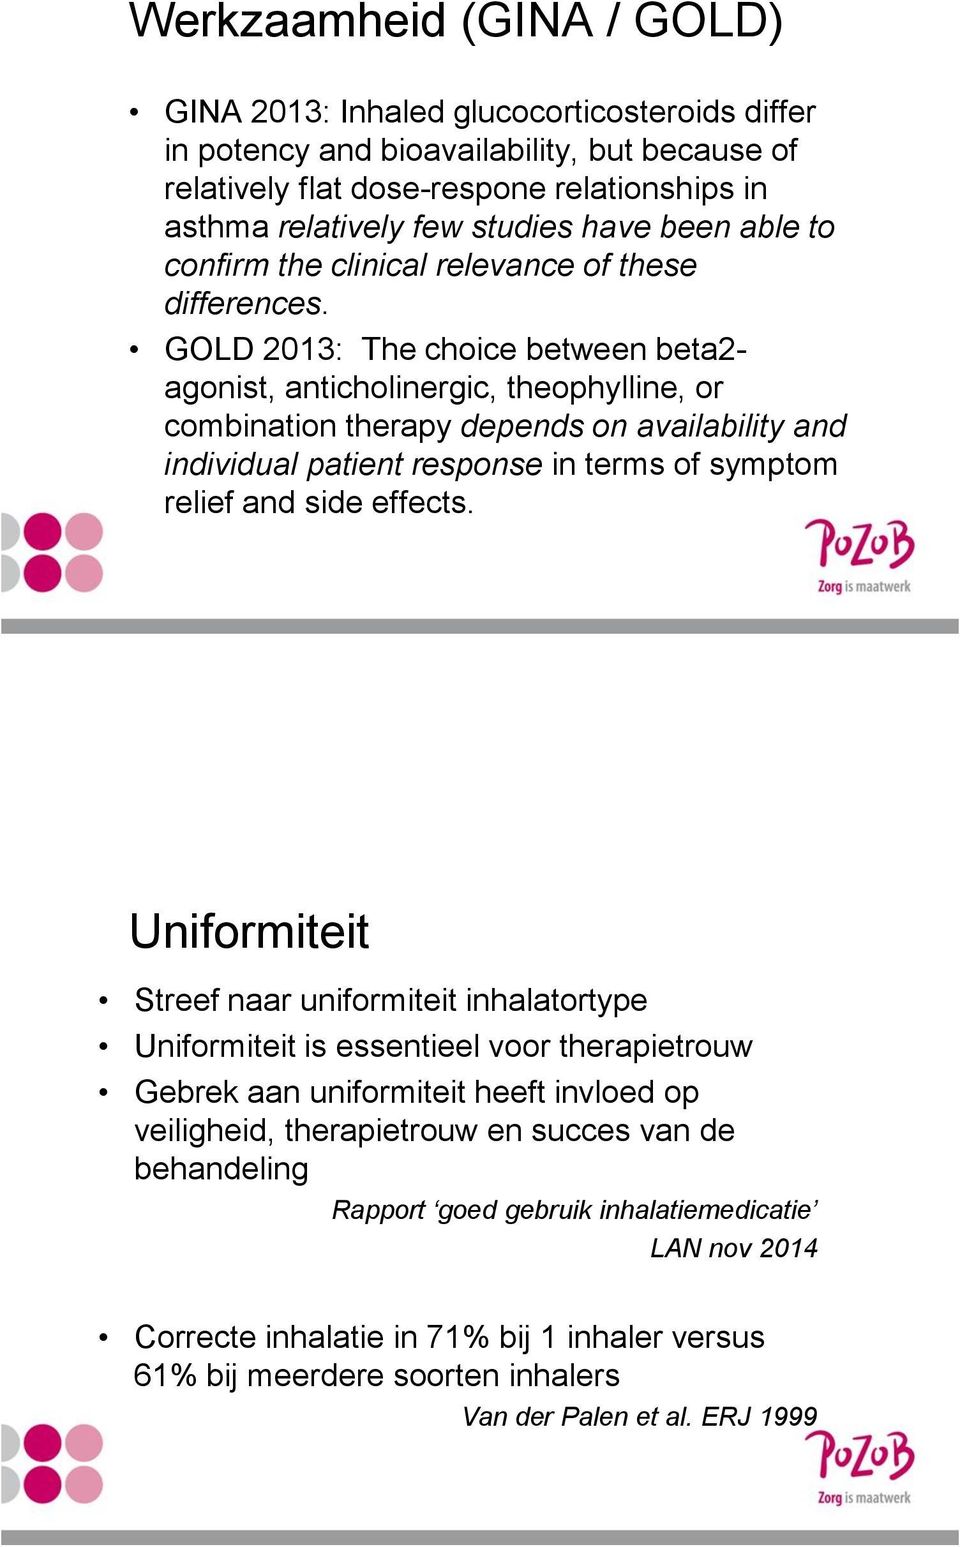 GOLD 2013: The choice between beta2- agonist, anticholinergic, theophylline, or combination therapy depends on availability and individual patient response in terms of symptom relief and side effects.